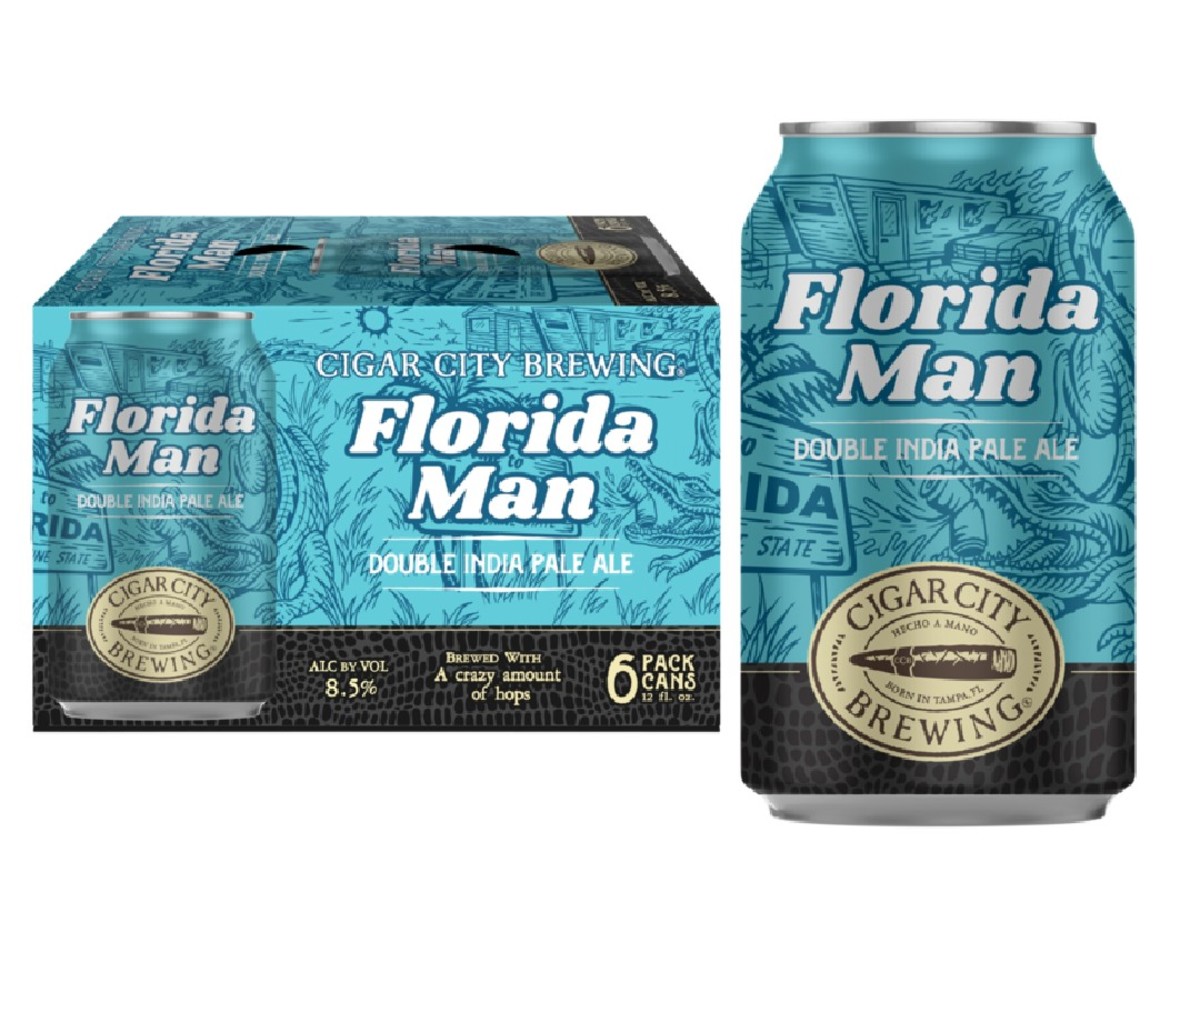 Can of Cigar City Florida Man double IPA beer next to a boxed 6 pack